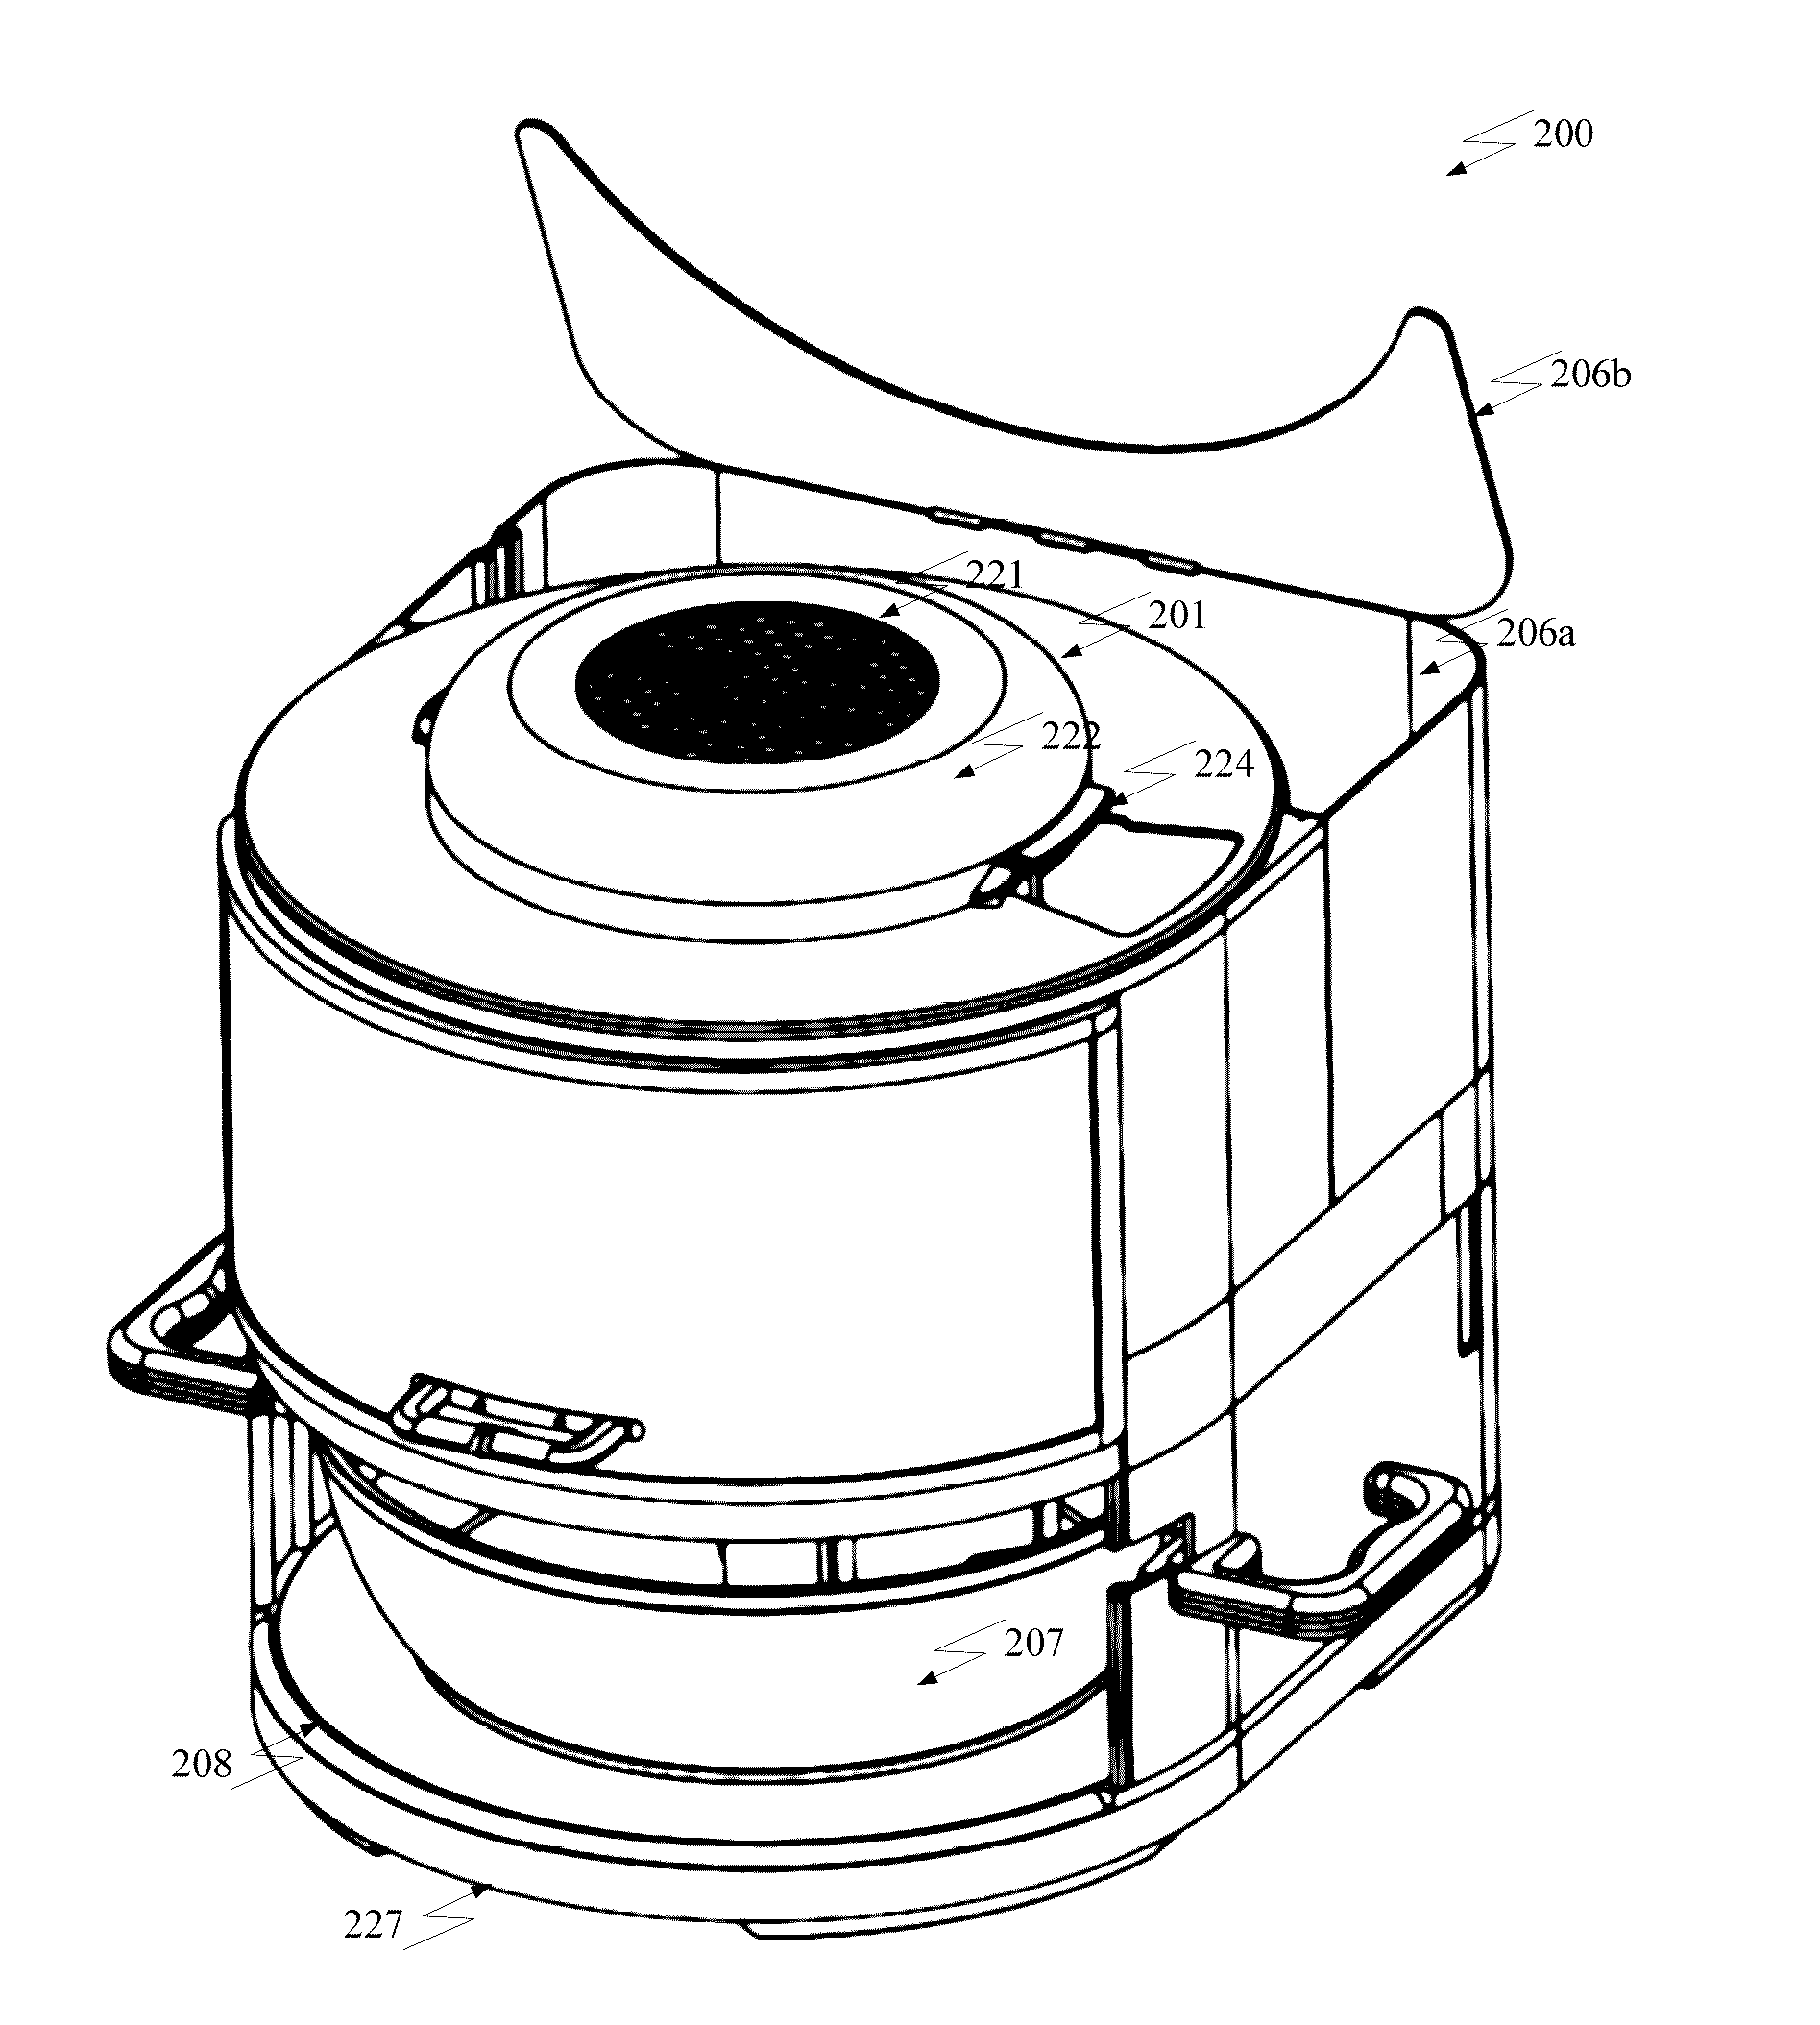 System and method of an attachable spice dispensing device for an automatic meal preparation apparatus